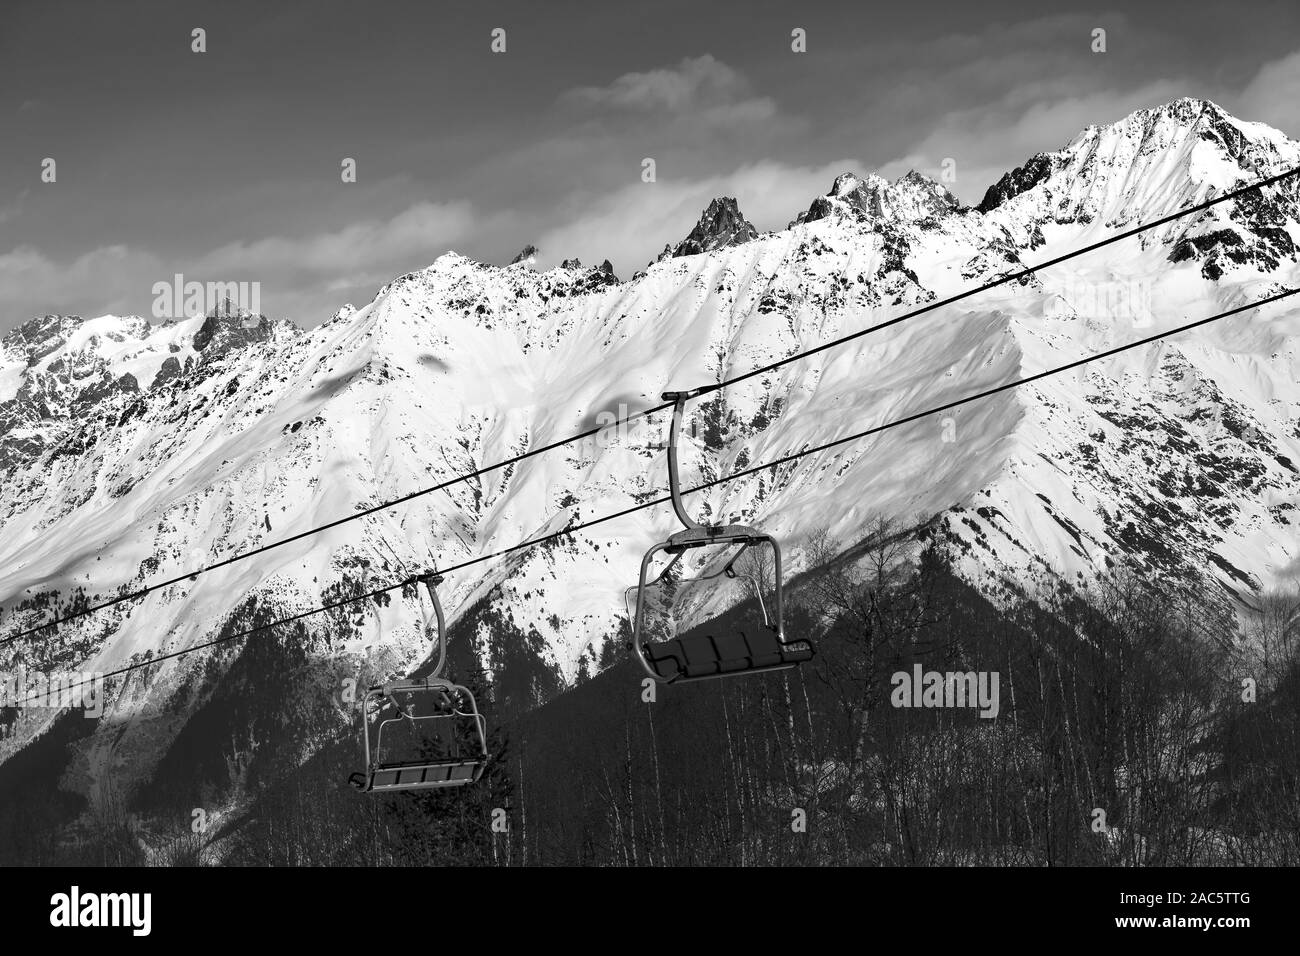 Ski resort with chair lift and snowy mountains at nice sunny day. Caucasus Mountains. Hatsvali, Svaneti region of Georgia at winter. Black and white t Stock Photo